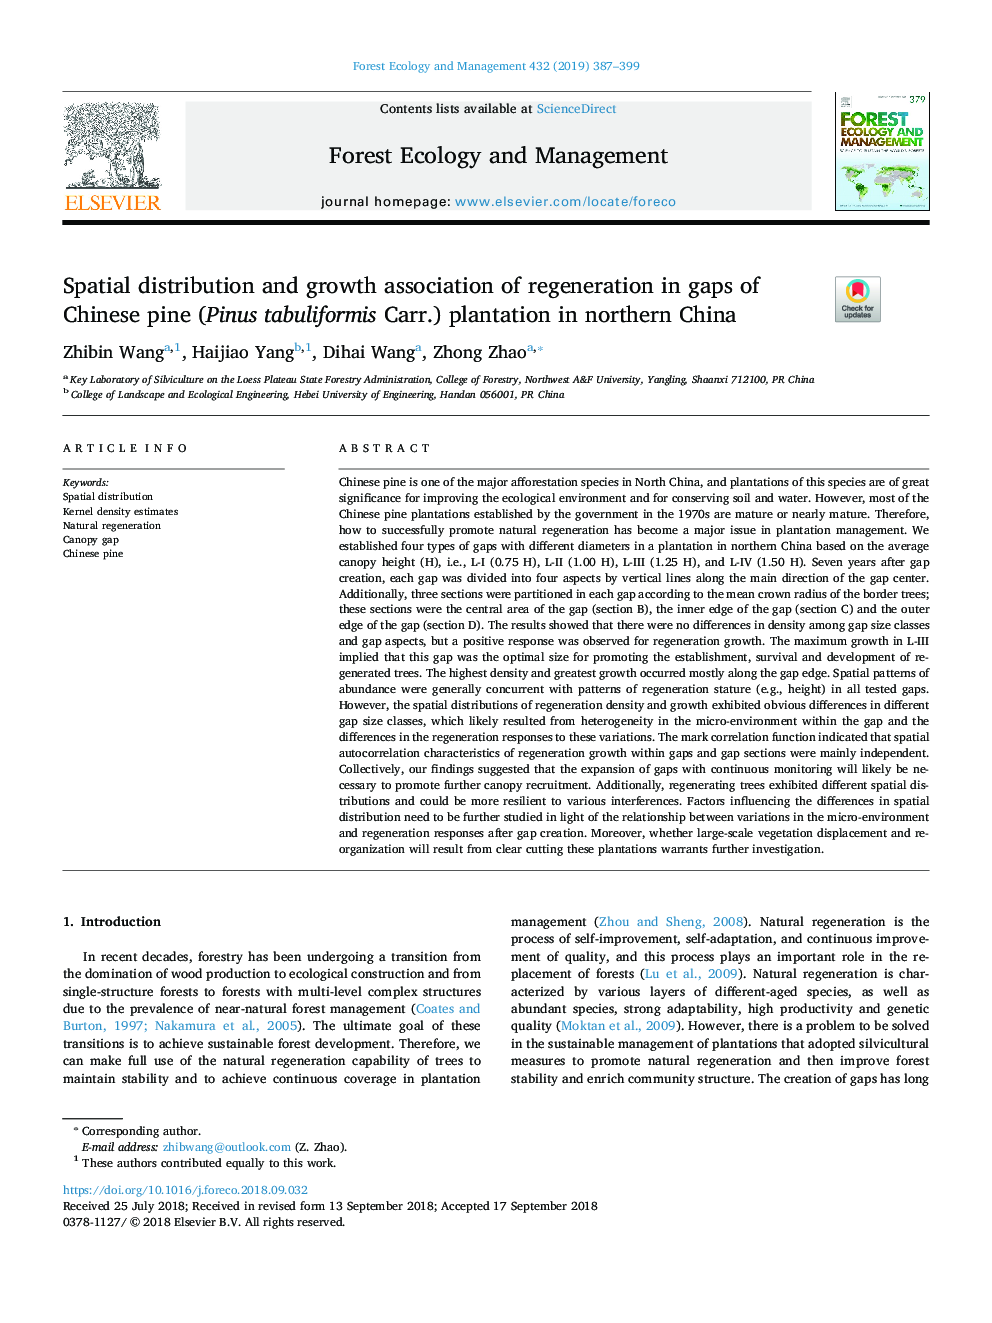 Spatial distribution and growth association of regeneration in gaps of Chinese pine (Pinus tabuliformis Carr.) plantation in northern China